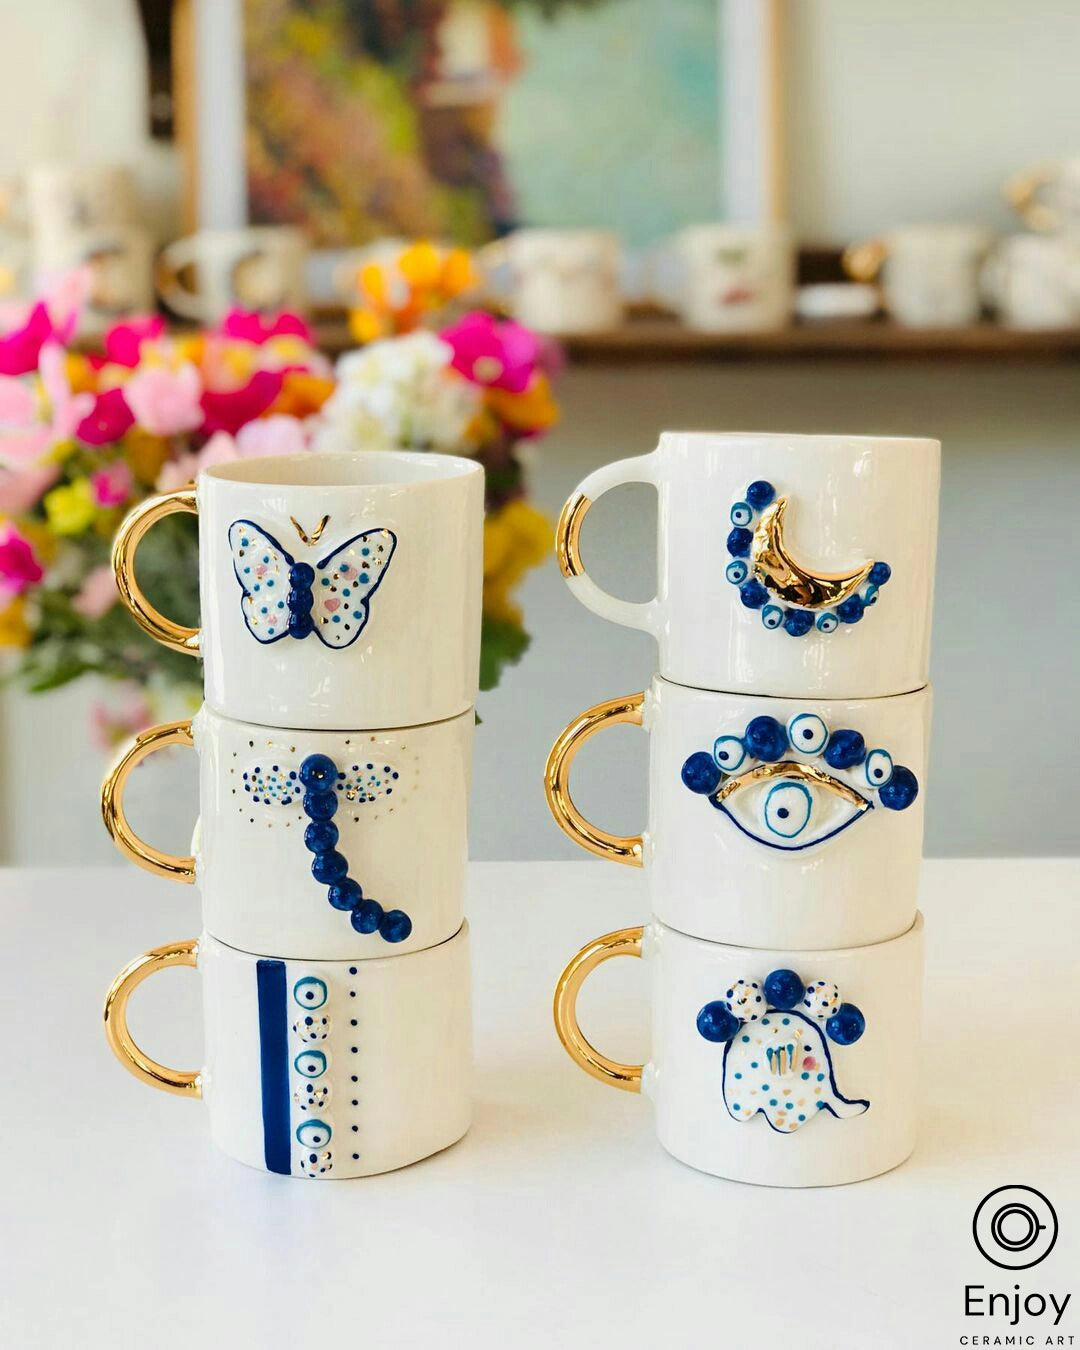 Two stacks of artisanal ceramic coffee mugs with gold handles and unique beadwork designs, including dragonflies and the evil eye, displayed on a table with a colorful floral and art background.